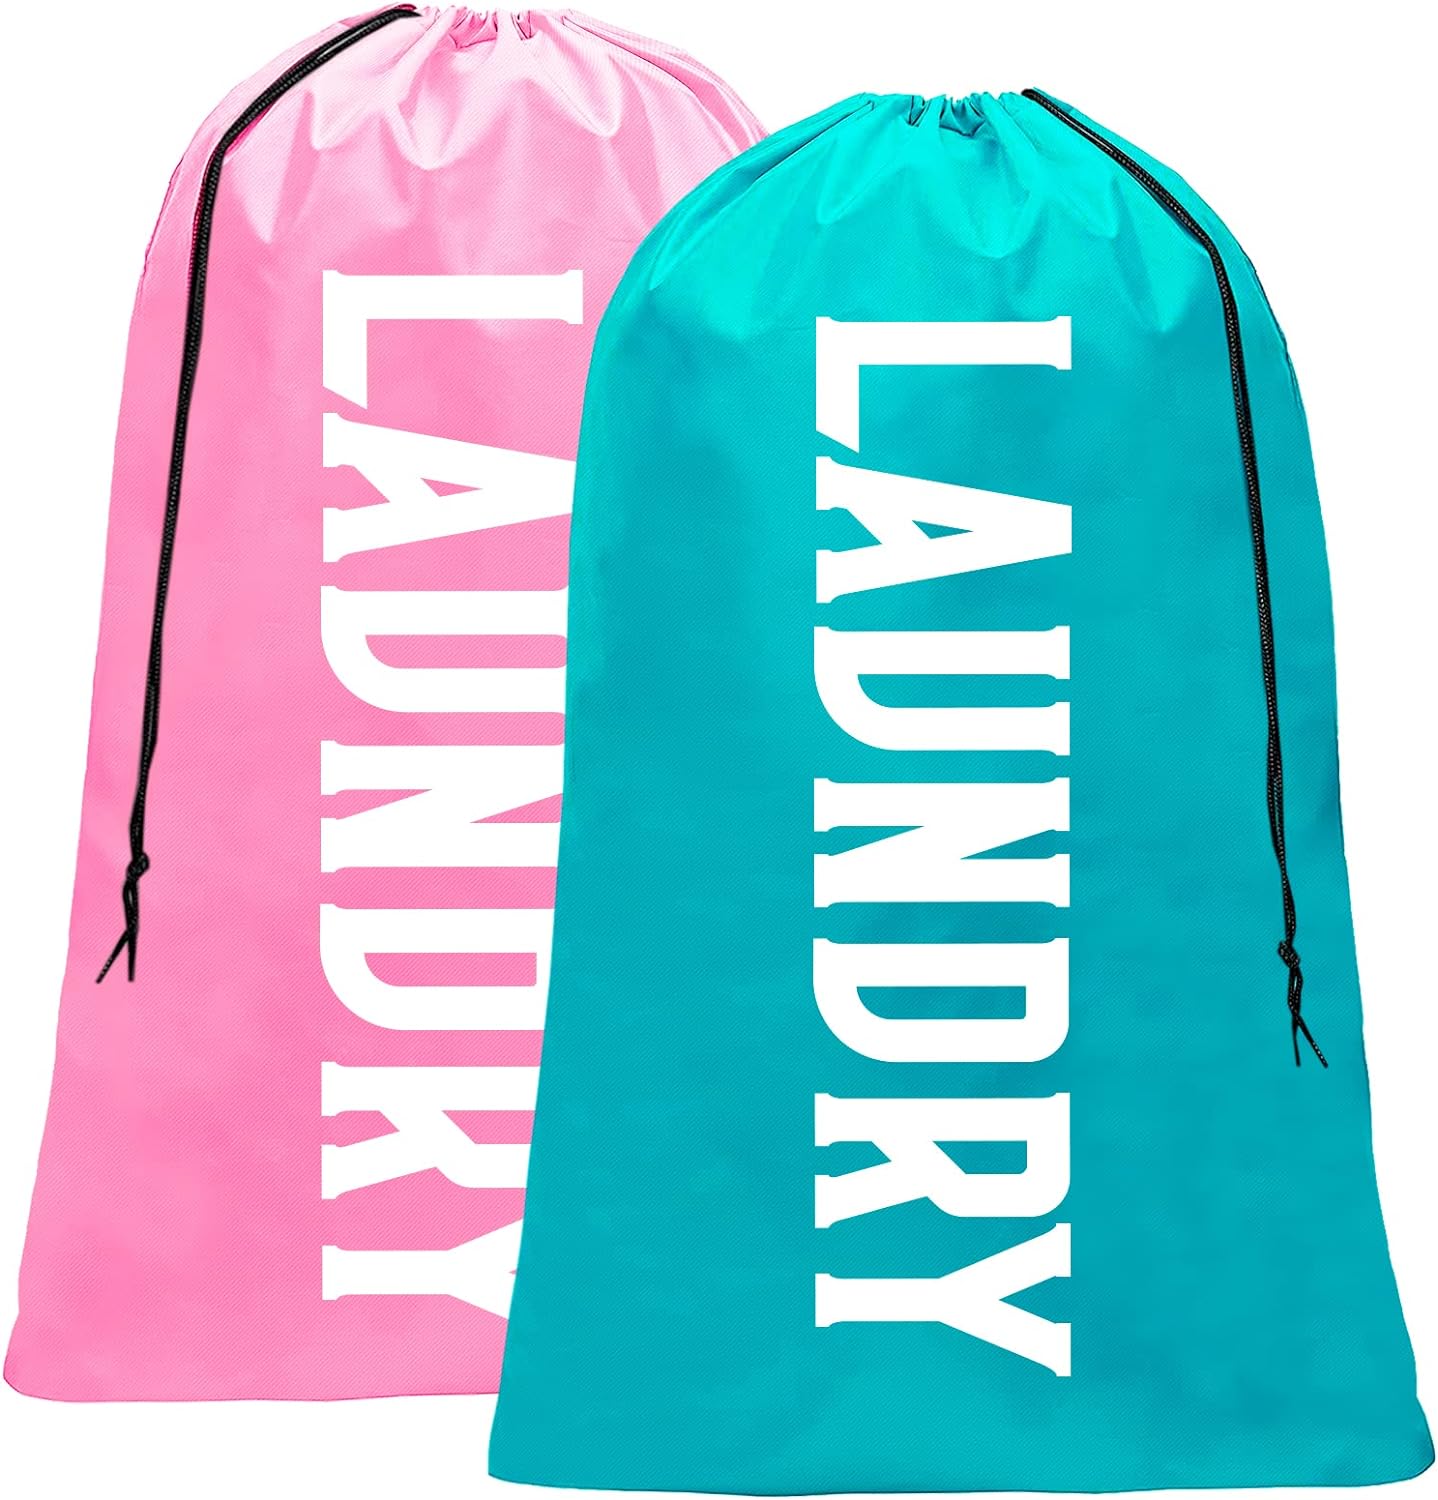 Fiodrmy 2 Pack XL Travel Laundry Bag, Machine Washable Dirty Clothes Organizer, Large Enough to Hold 4 Loads of Laundry, Easy Fit a Laundry Hamper or Basket (Pink+Blue, 24 x 36)